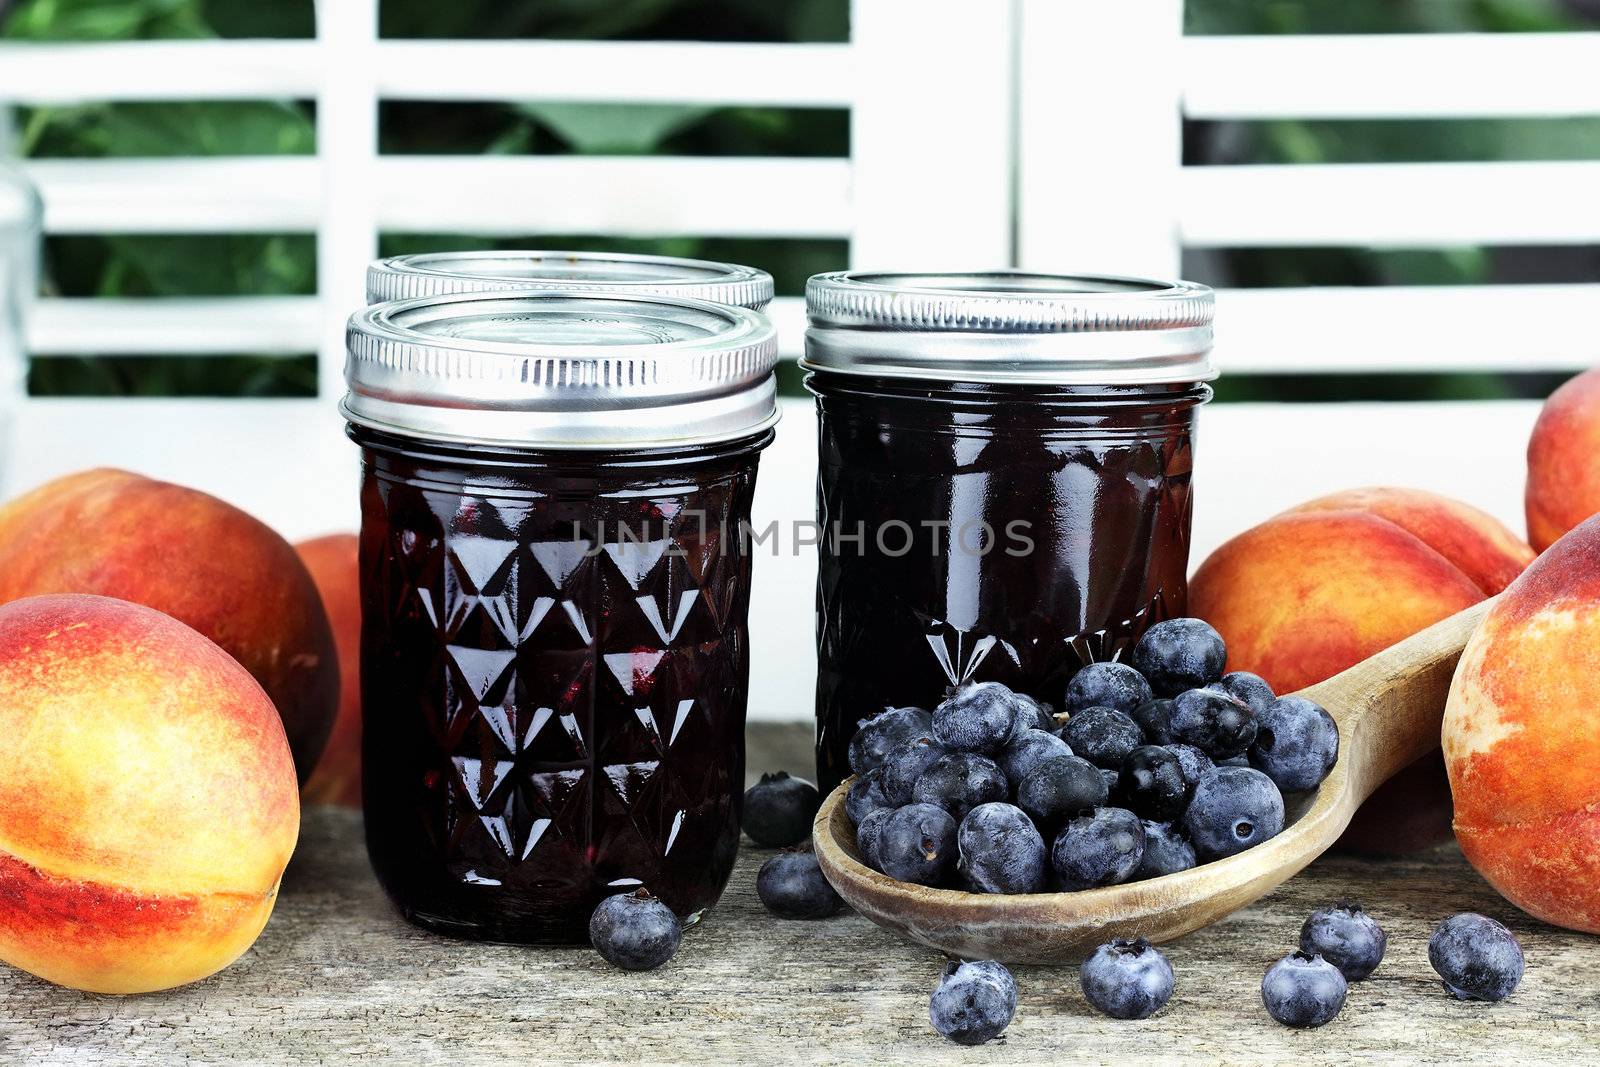 Homemade canned blueberry peach preserves with fresh blueberries and peaches.